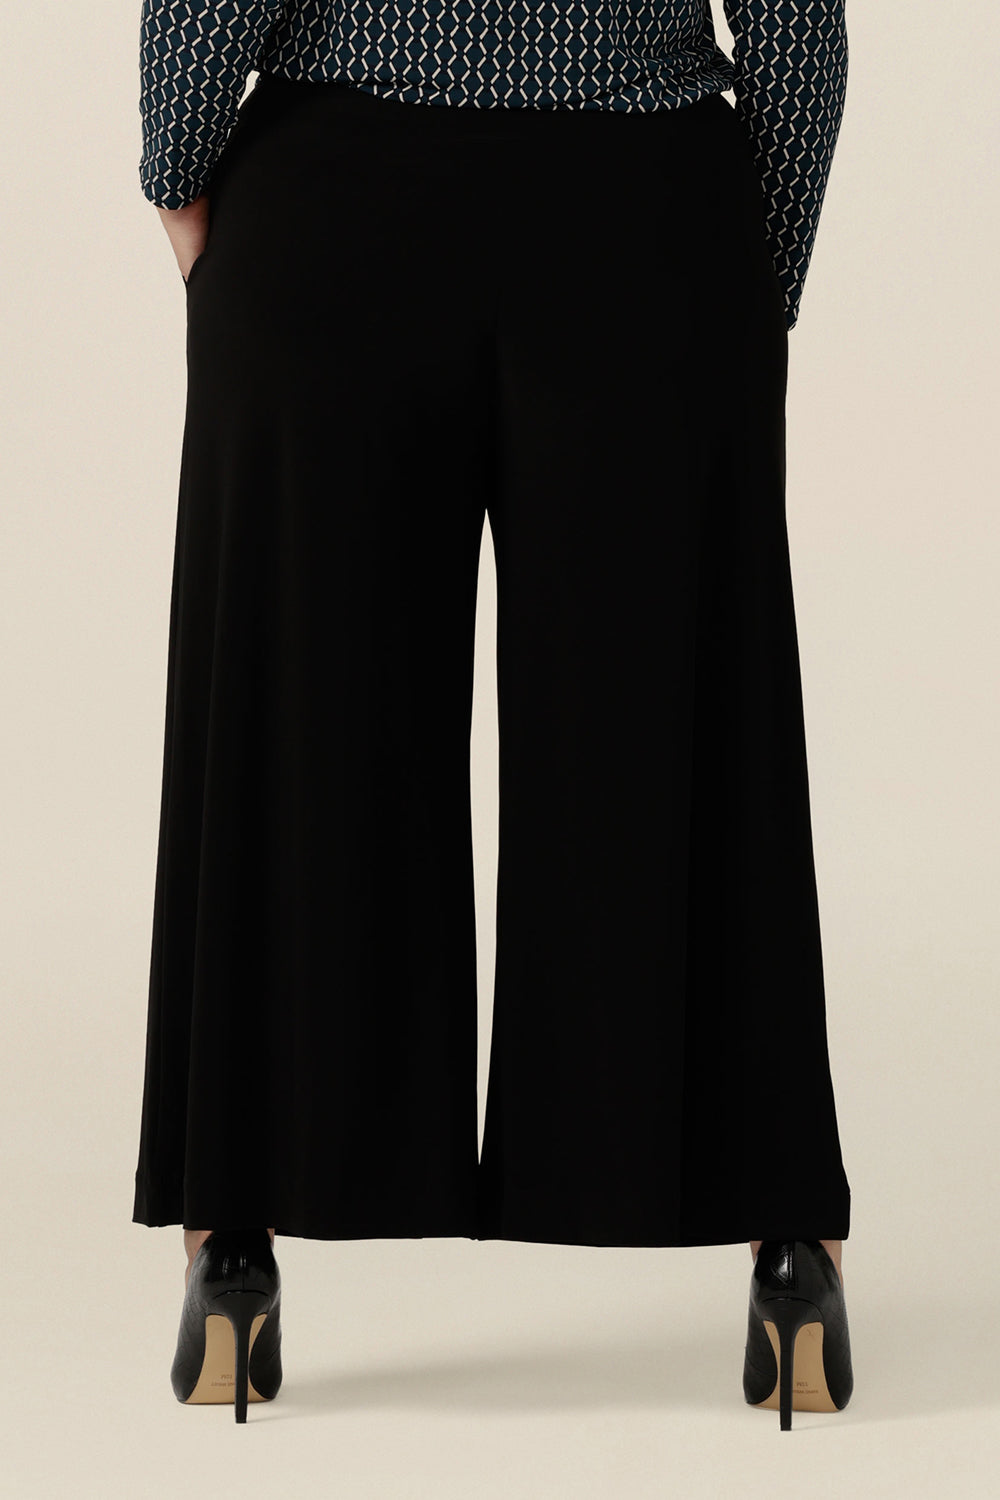 Back view of comfortable, black wide leg pants with pockets, shown in a size 18. These pull-on, easy care pants are comfortable for your everyday workwear capsule wardrobe. Shop these black pants online in sizes 8 to 24, petite to plus sizes.